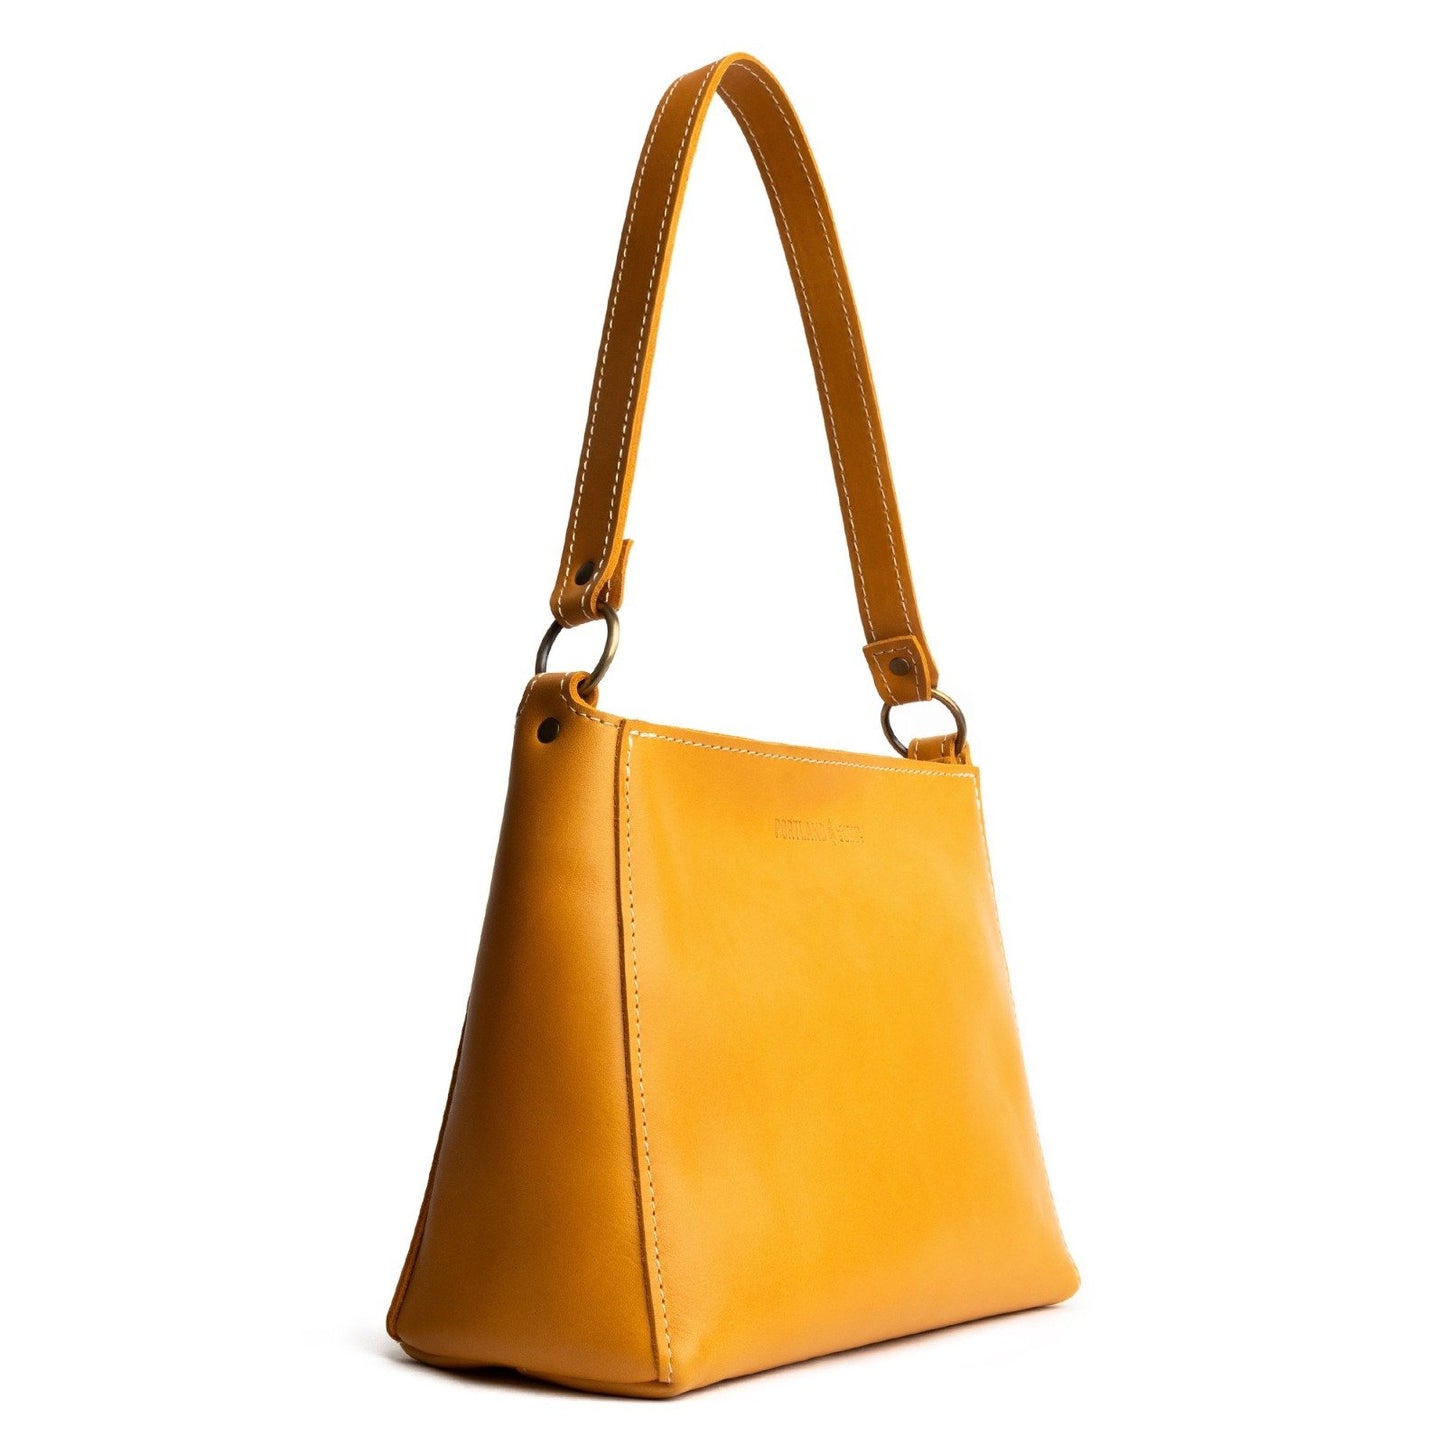 All Color: Sunflower | Triangle Leather Handmade Bag